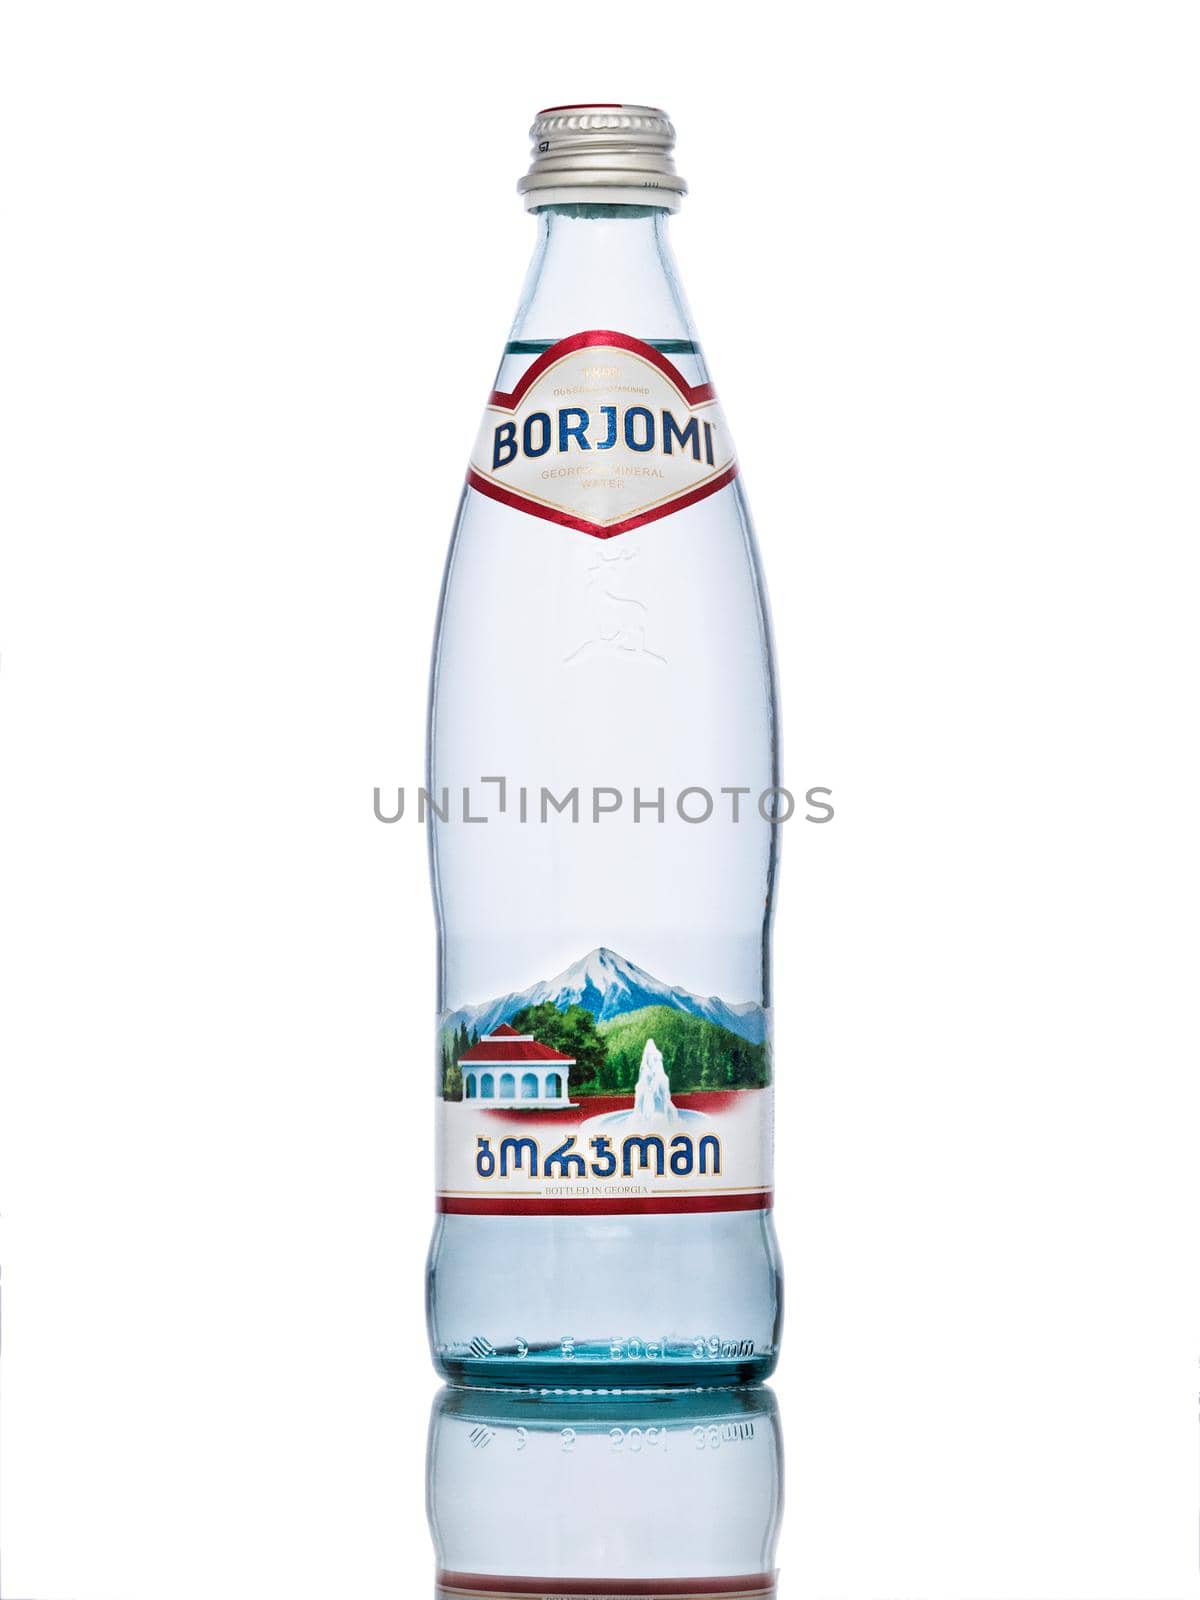 MOSCOW, RUSSIA - MARCH 17, 2017: Glass bottle of mineral water Borjomi by fascinadora